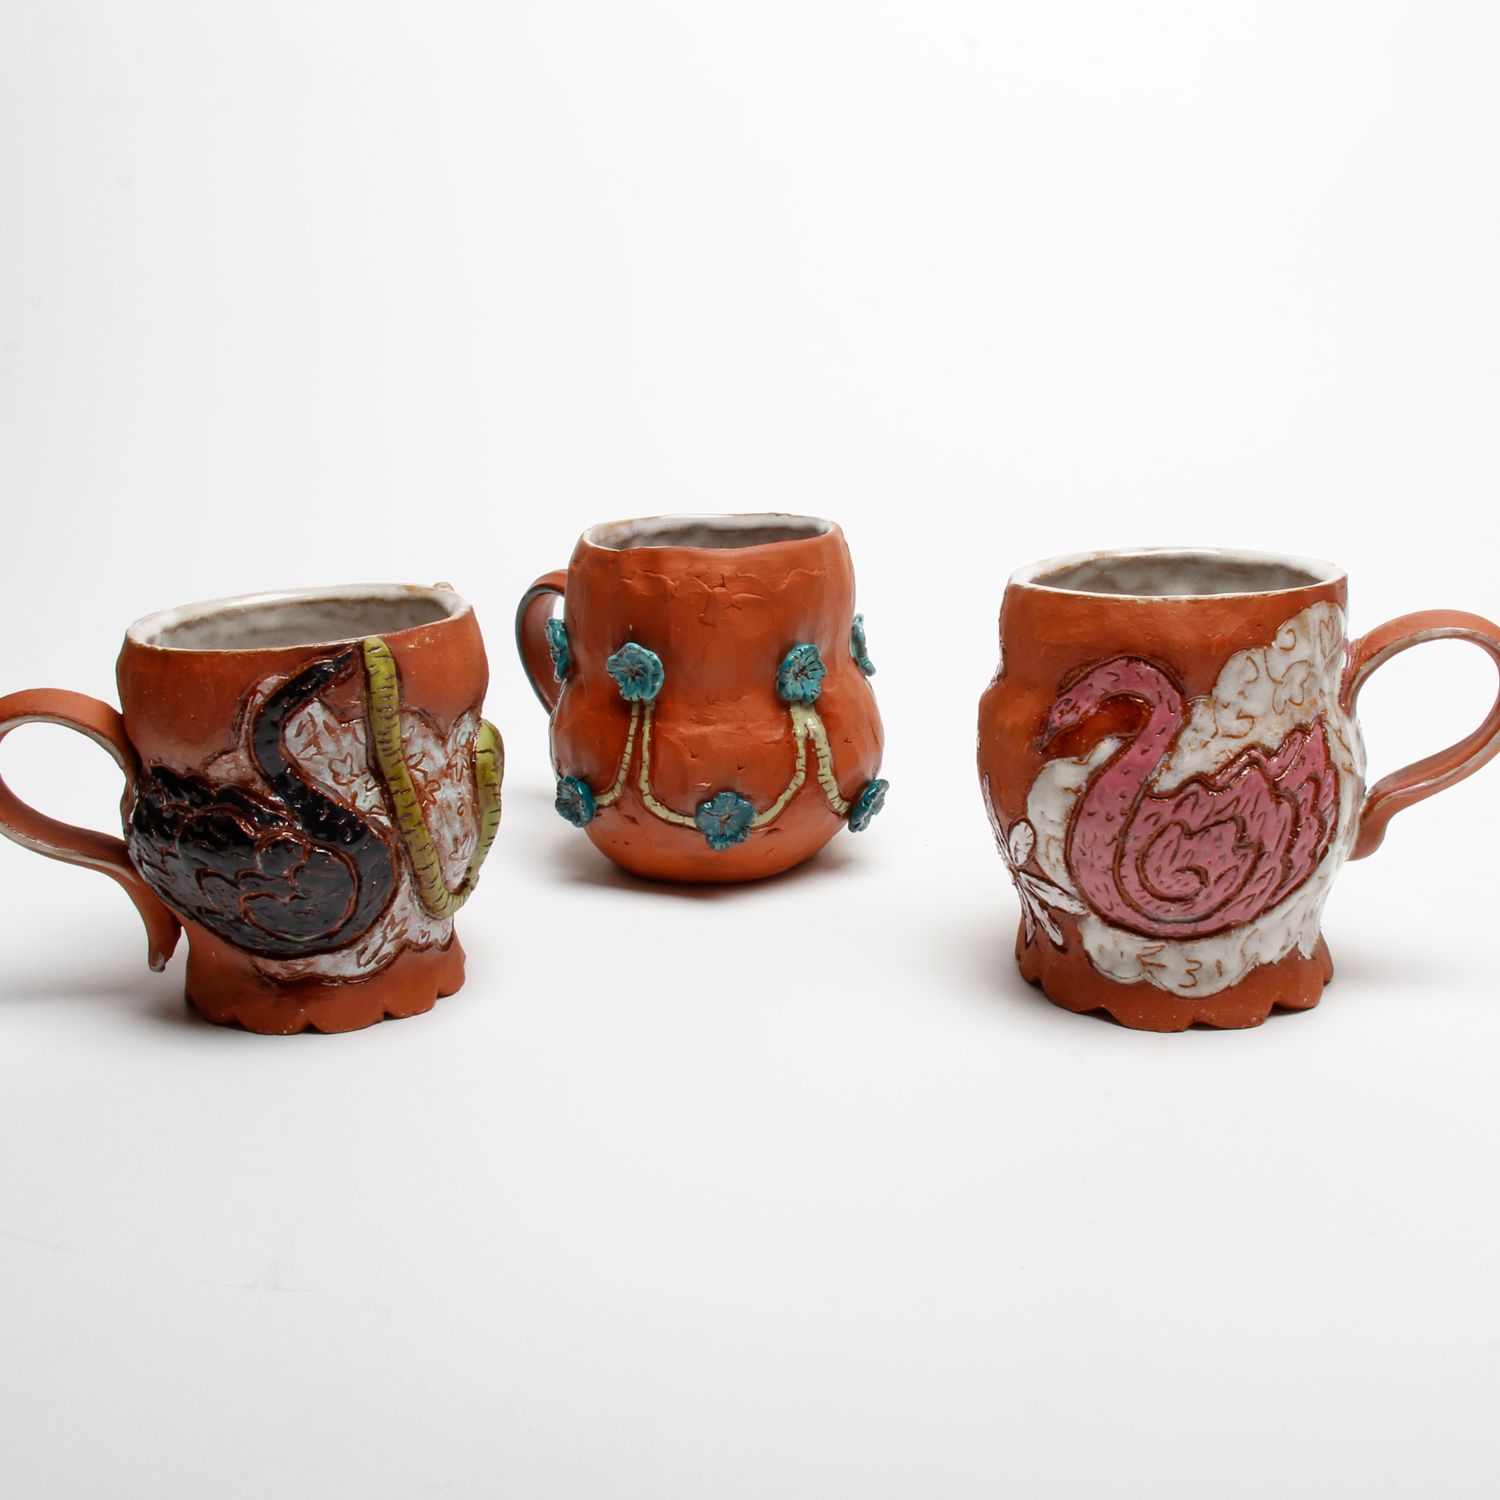 Zoë Pinnell: Tall Mug – Assorted Motifs Product Image 6 of 6